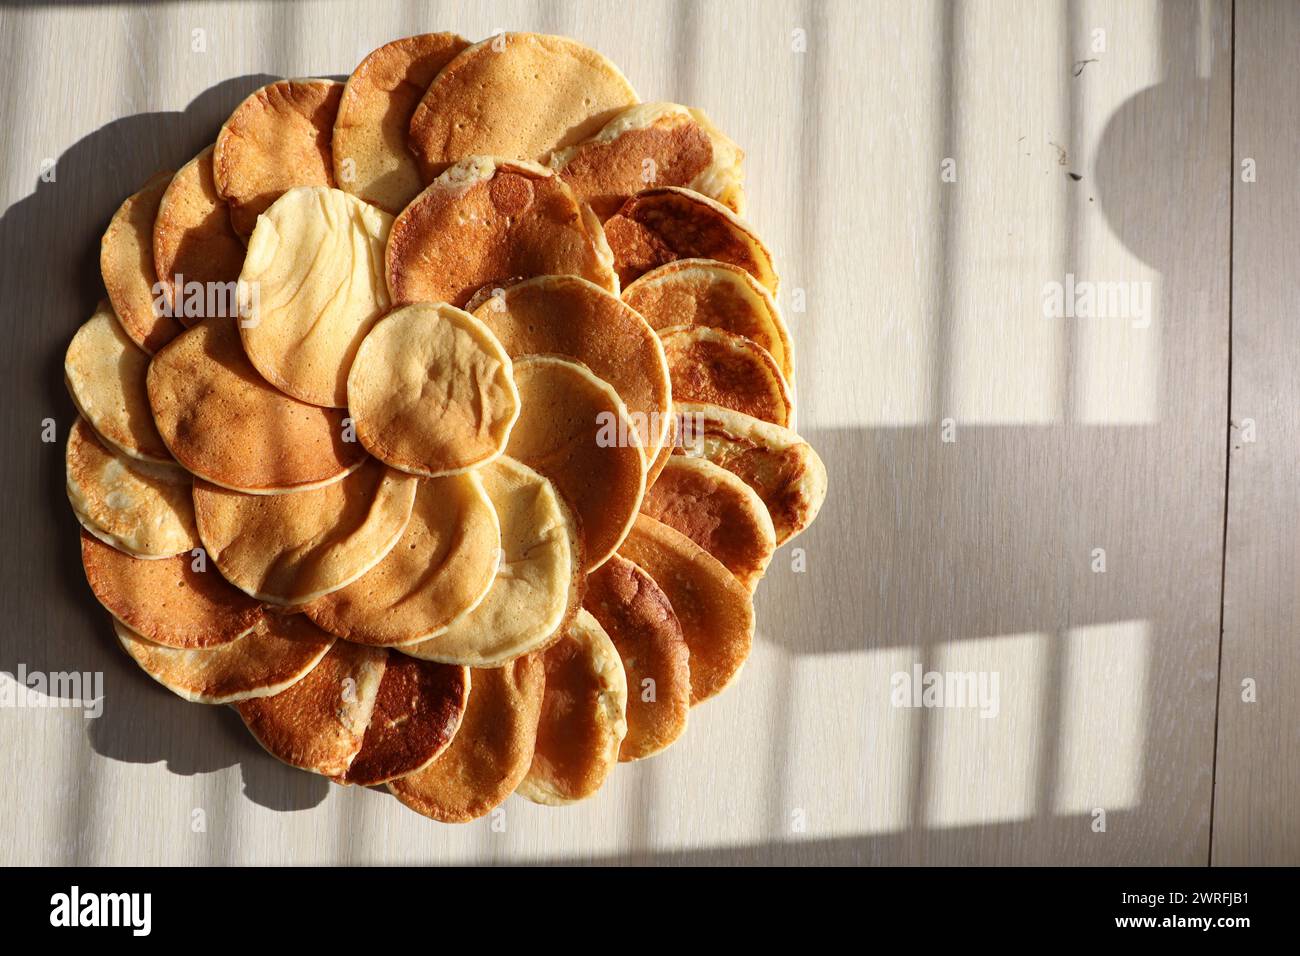 A pancake flower centerpiece displayed on a wooden table Stock Photo